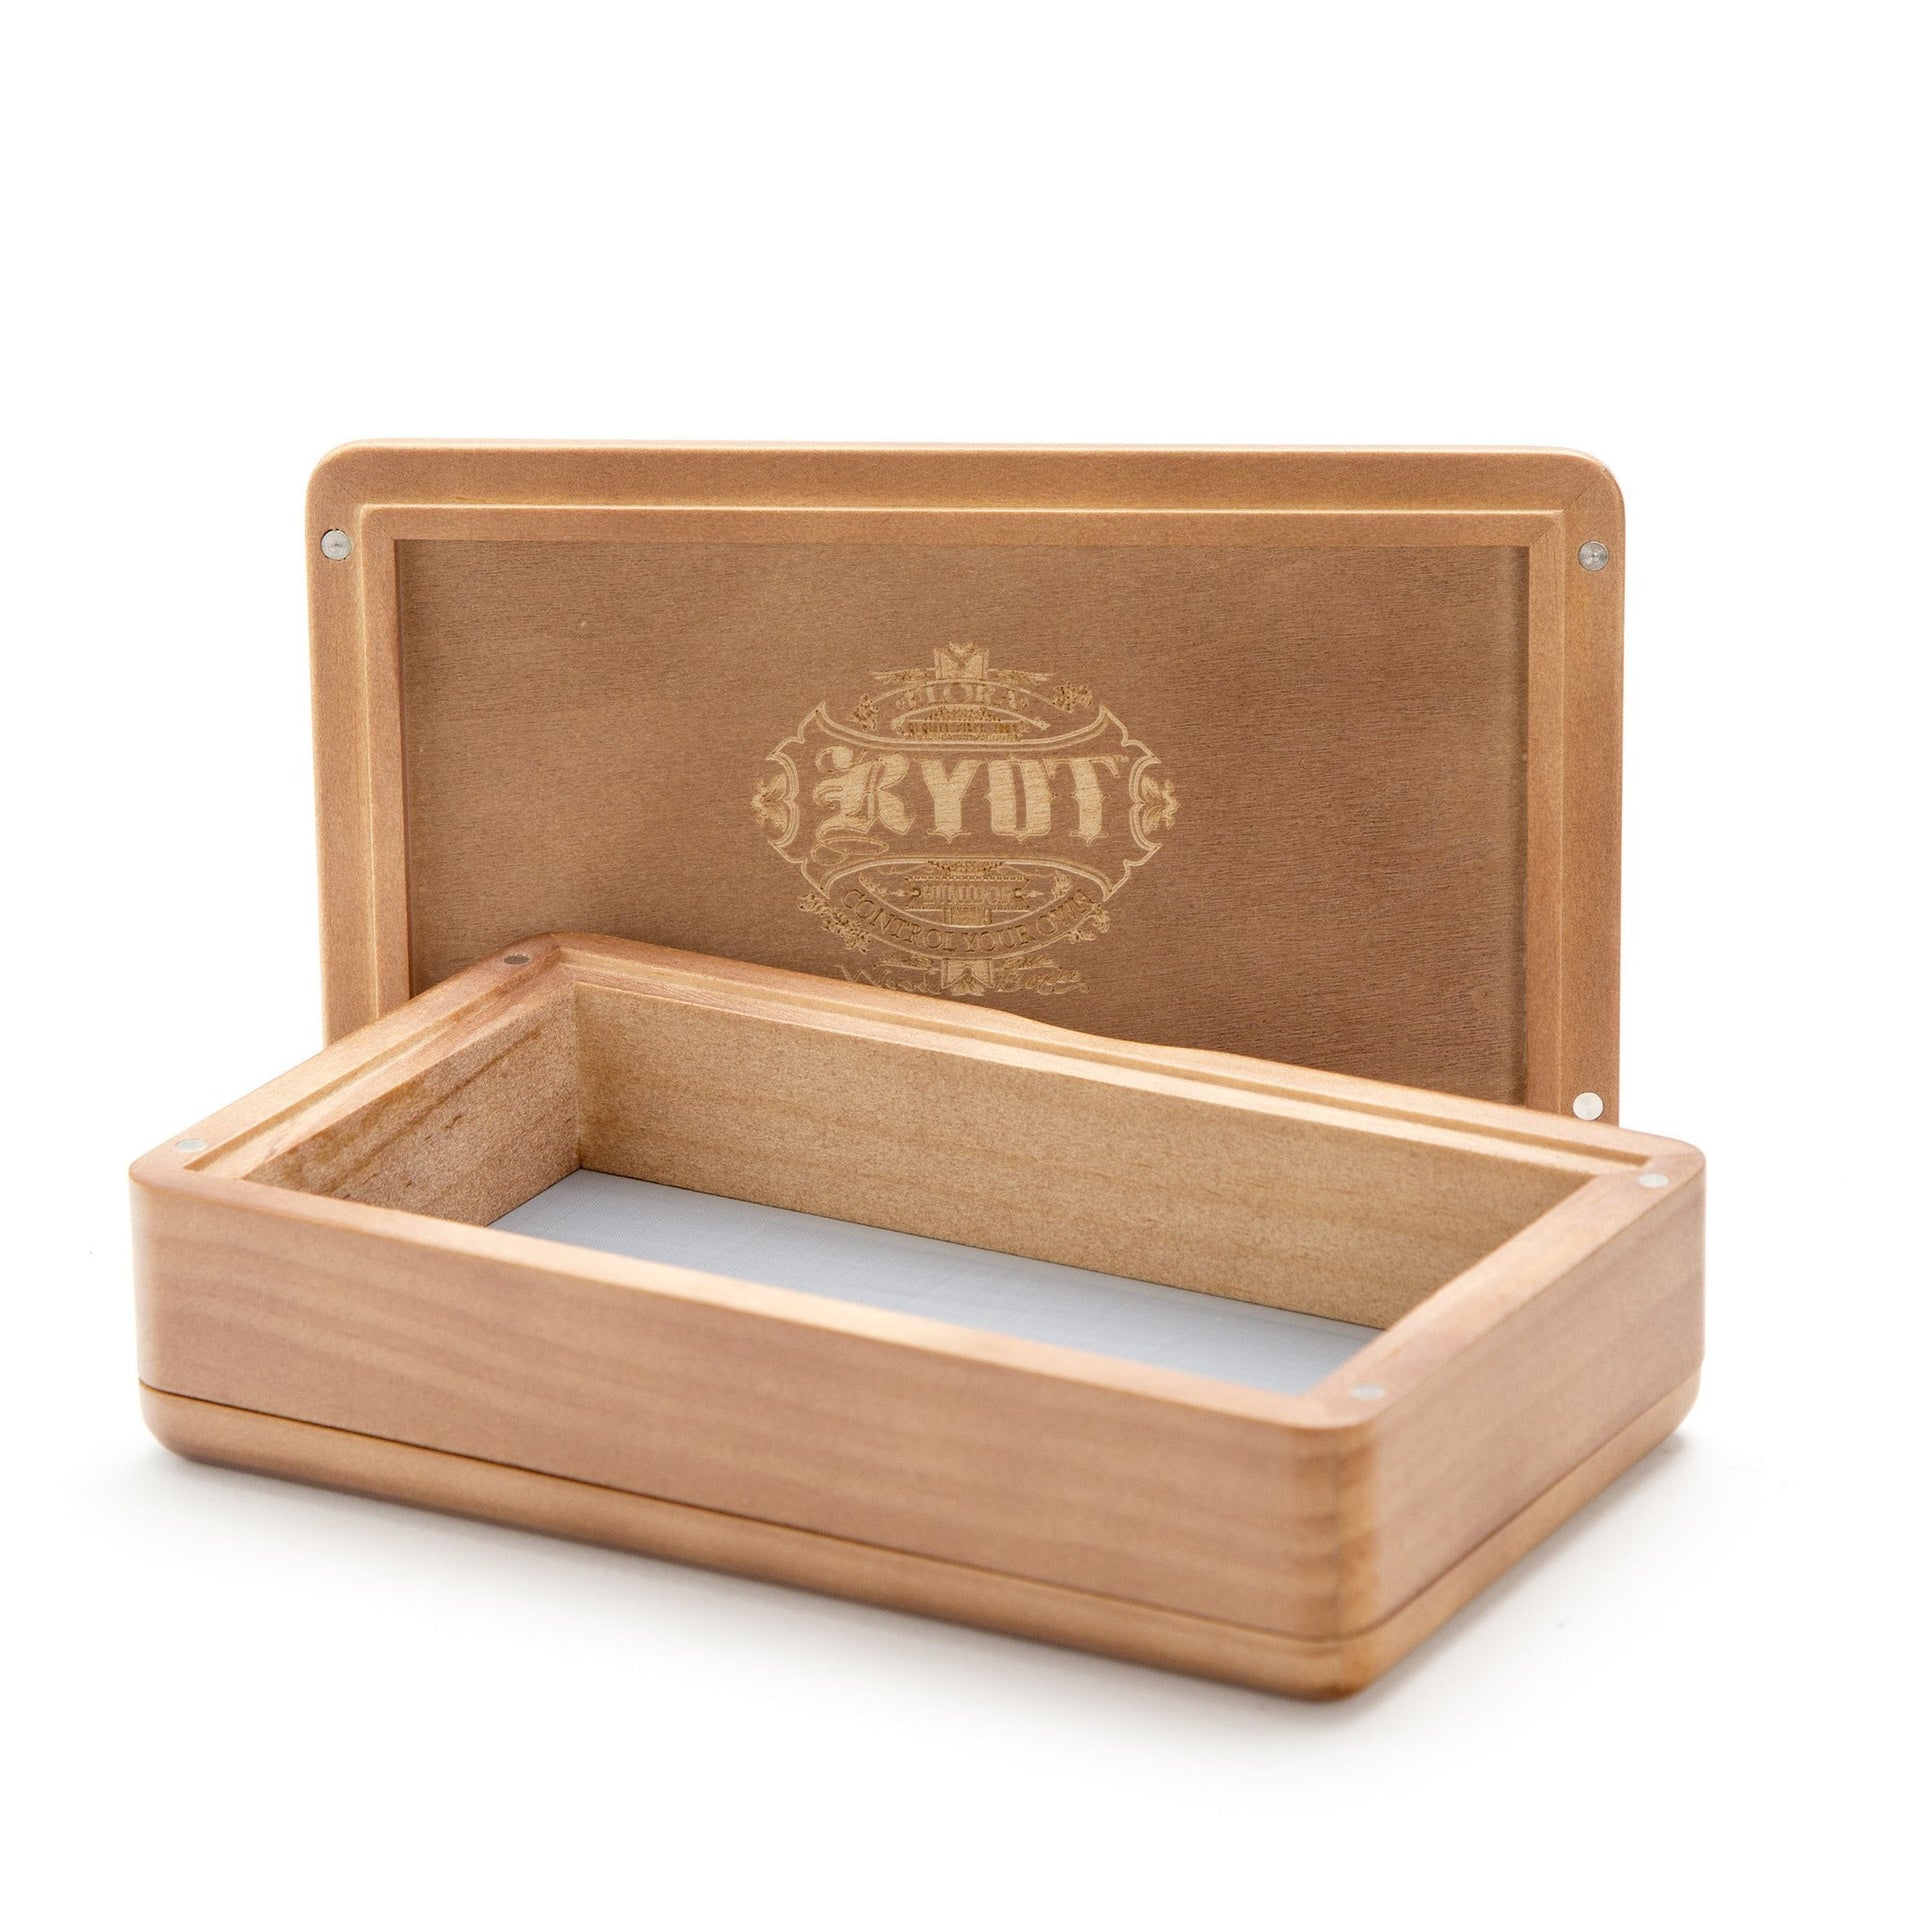 RYOT 4x7 Solid Top Screen Box - Walnut - 420 Science - The most trusted online smoke shop.